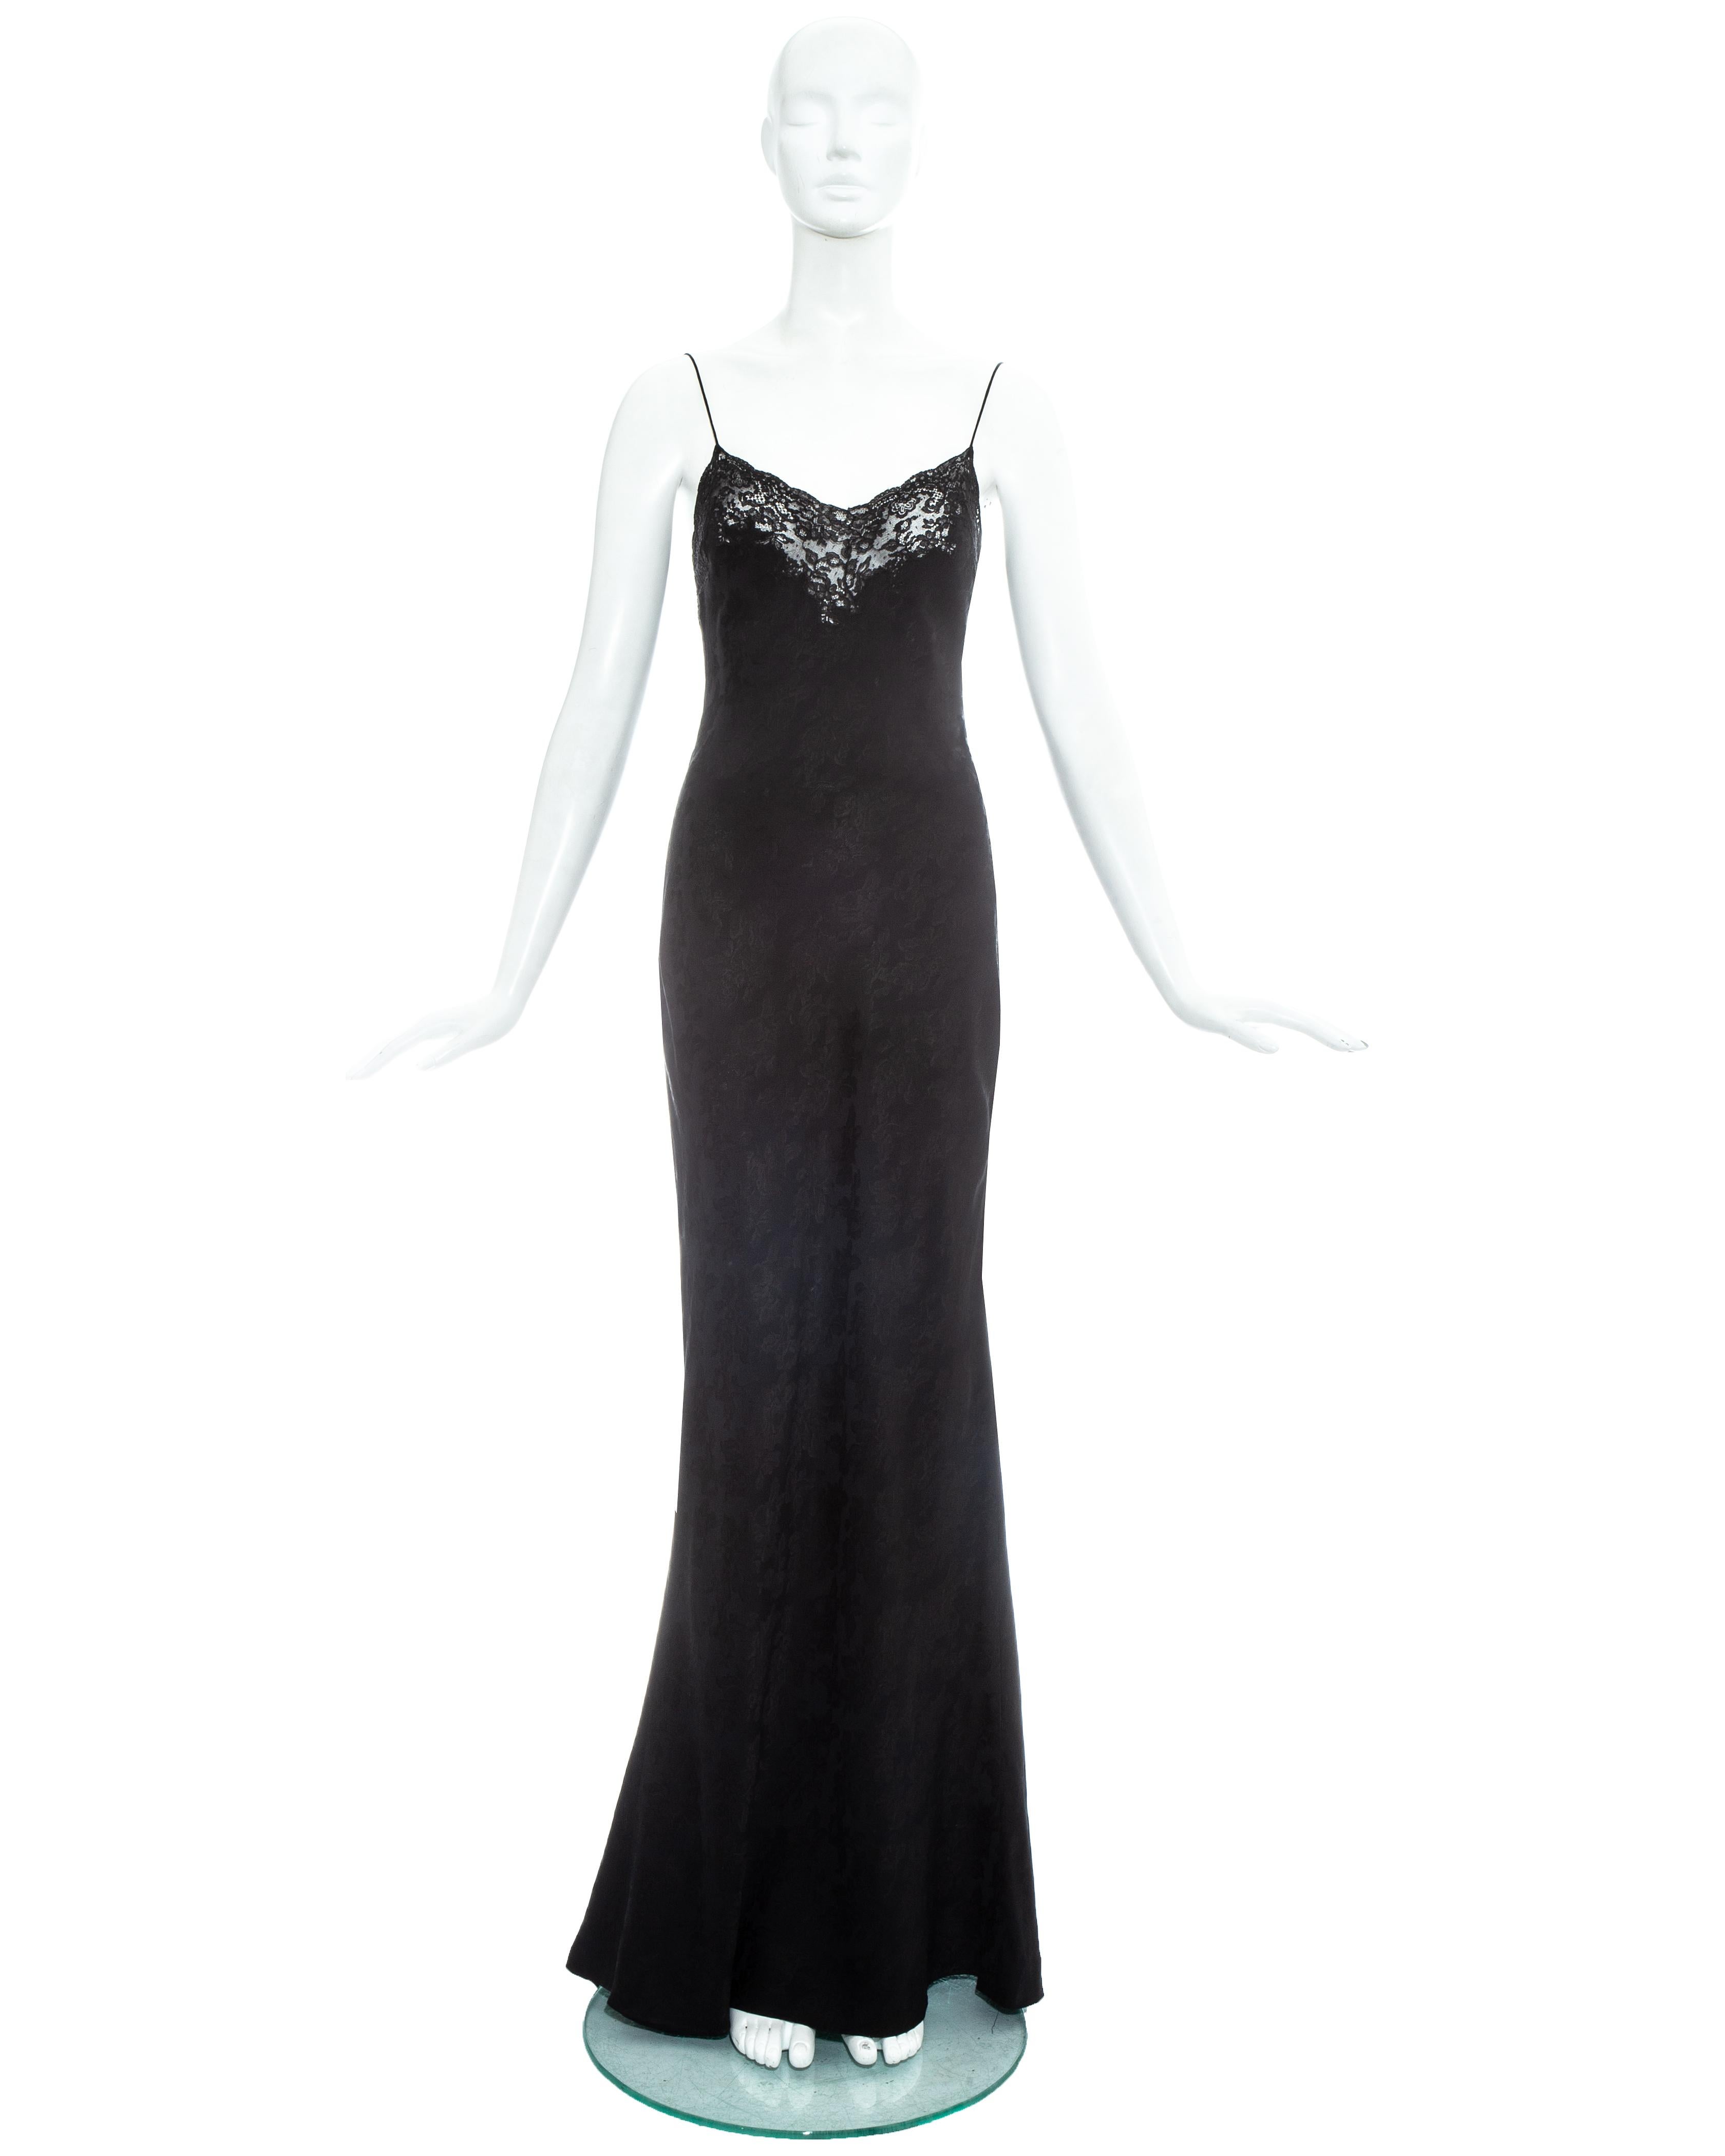 Women's Christian Dior by John Galliano black lace and fur dress and robe, fw 1998 For Sale